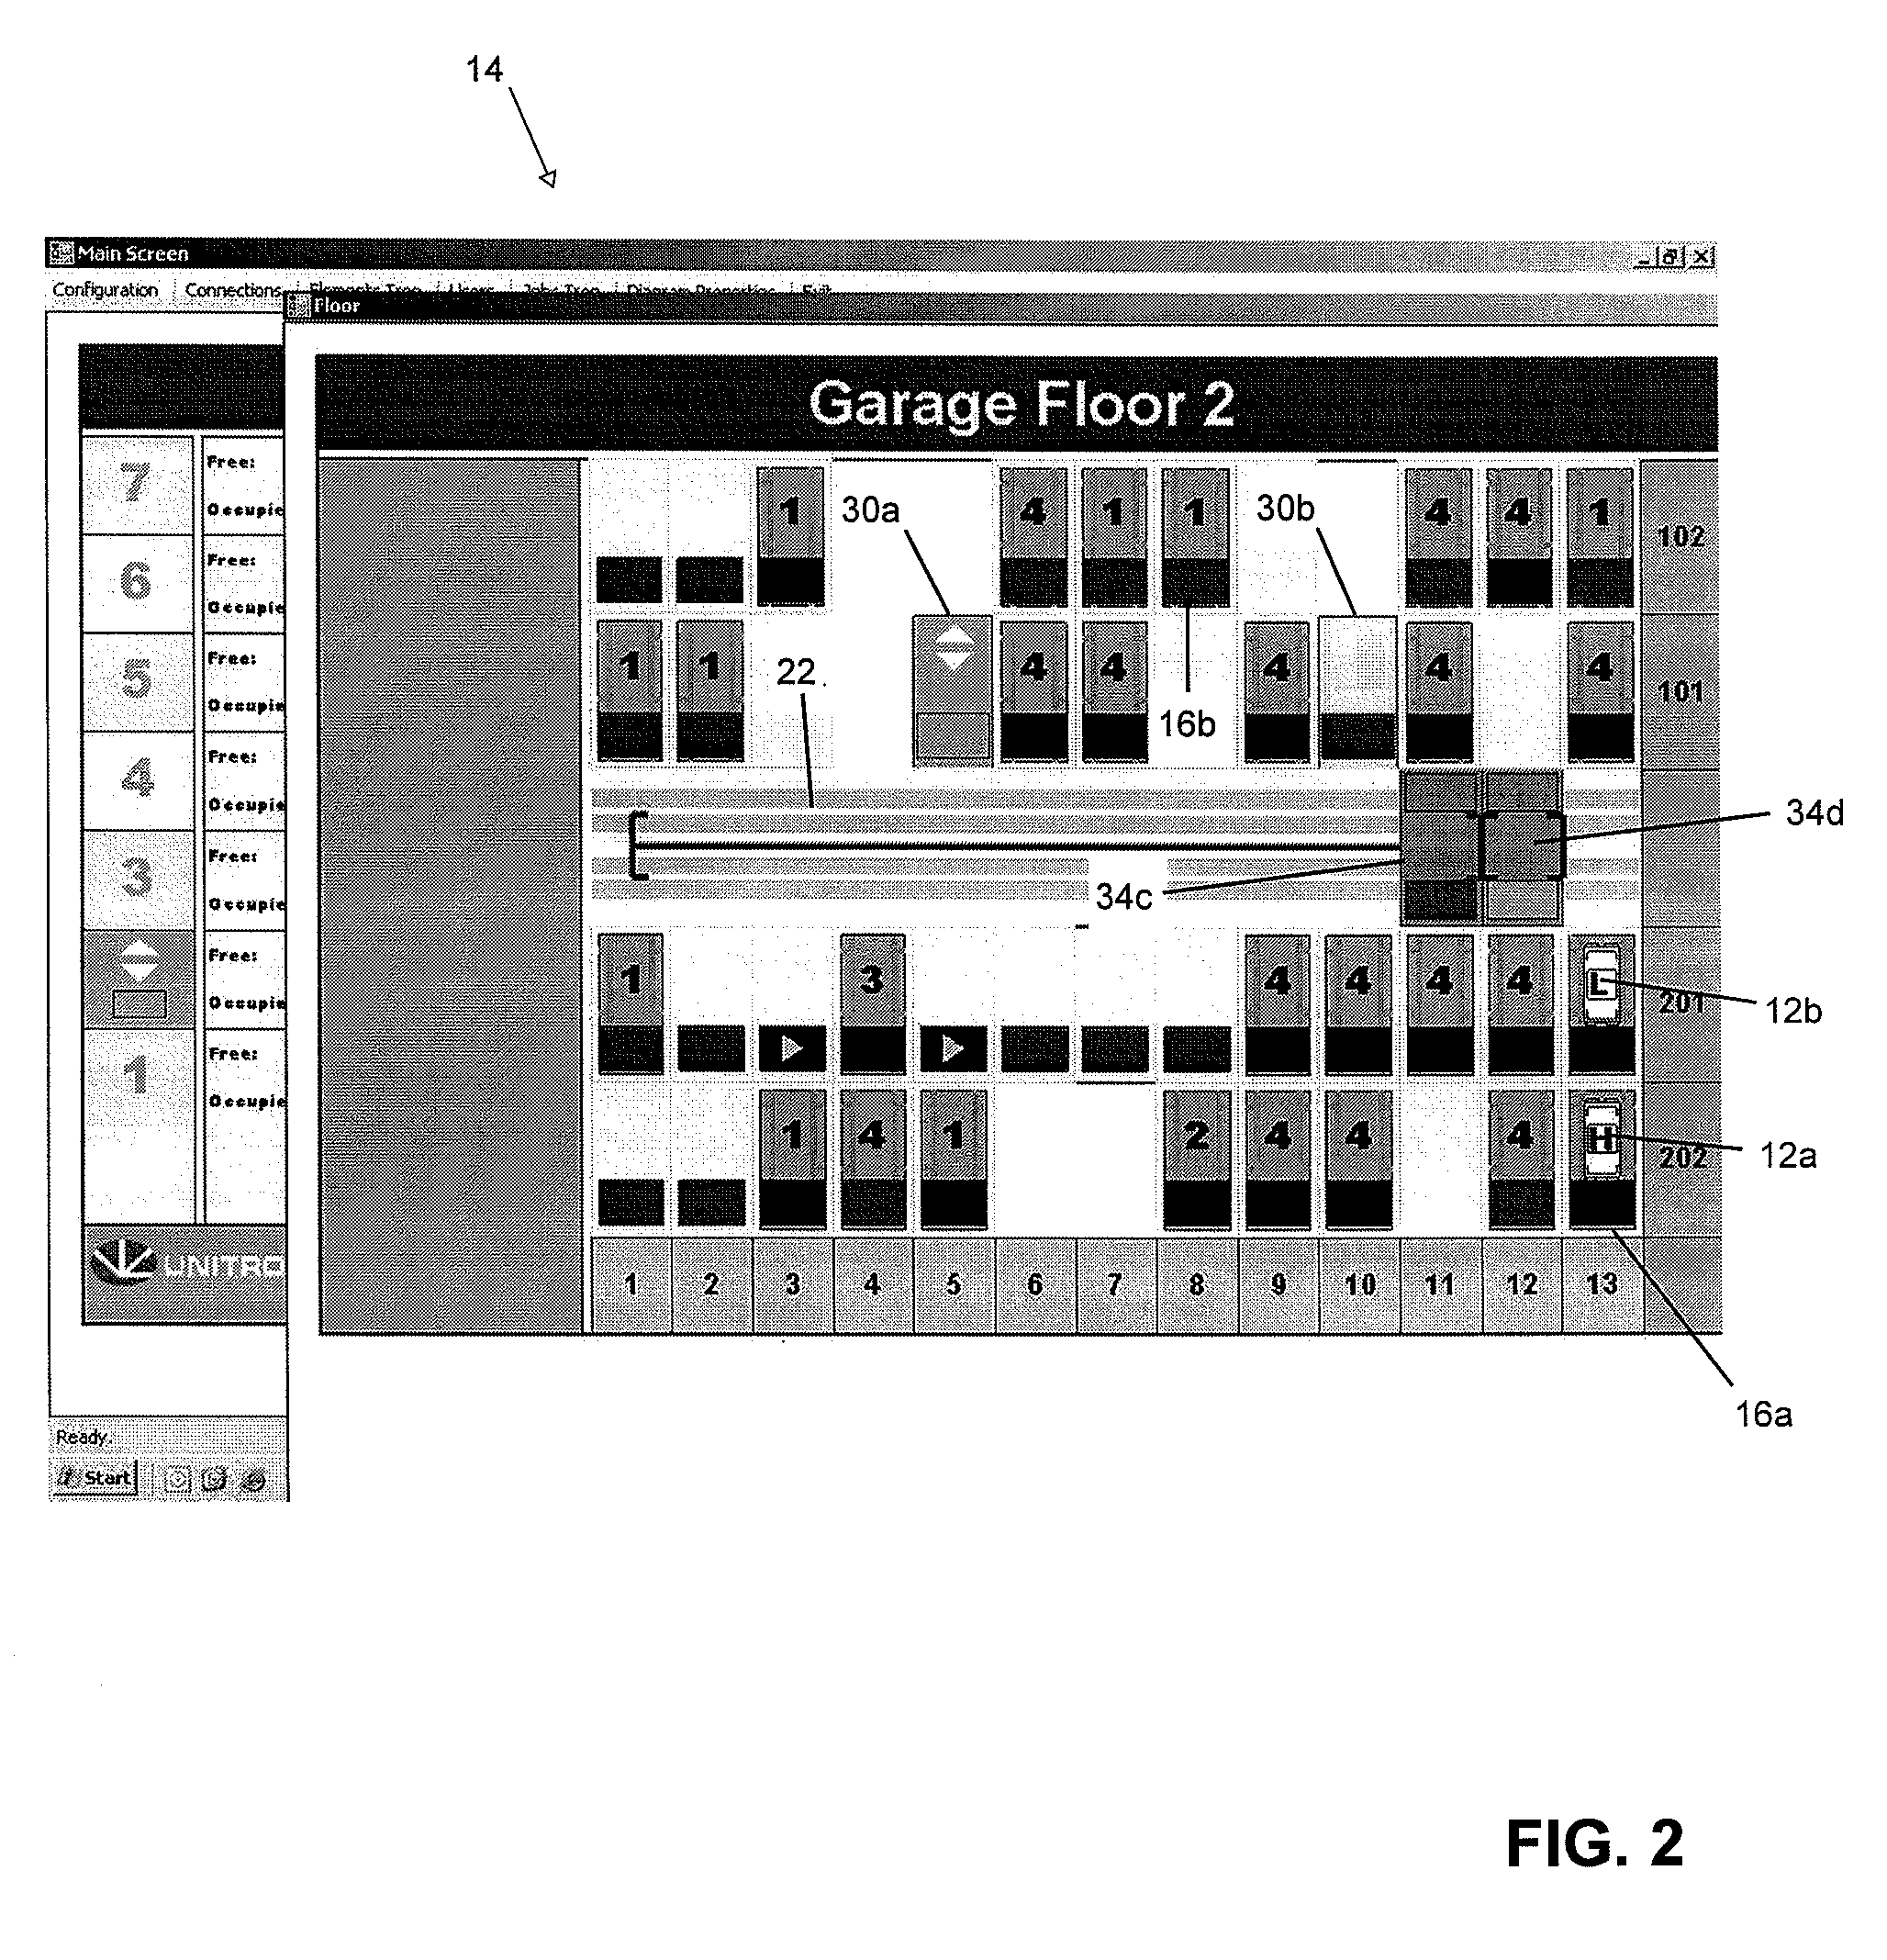 System and Method for Controlling and Managing an Automated Vehicle Parking Garage